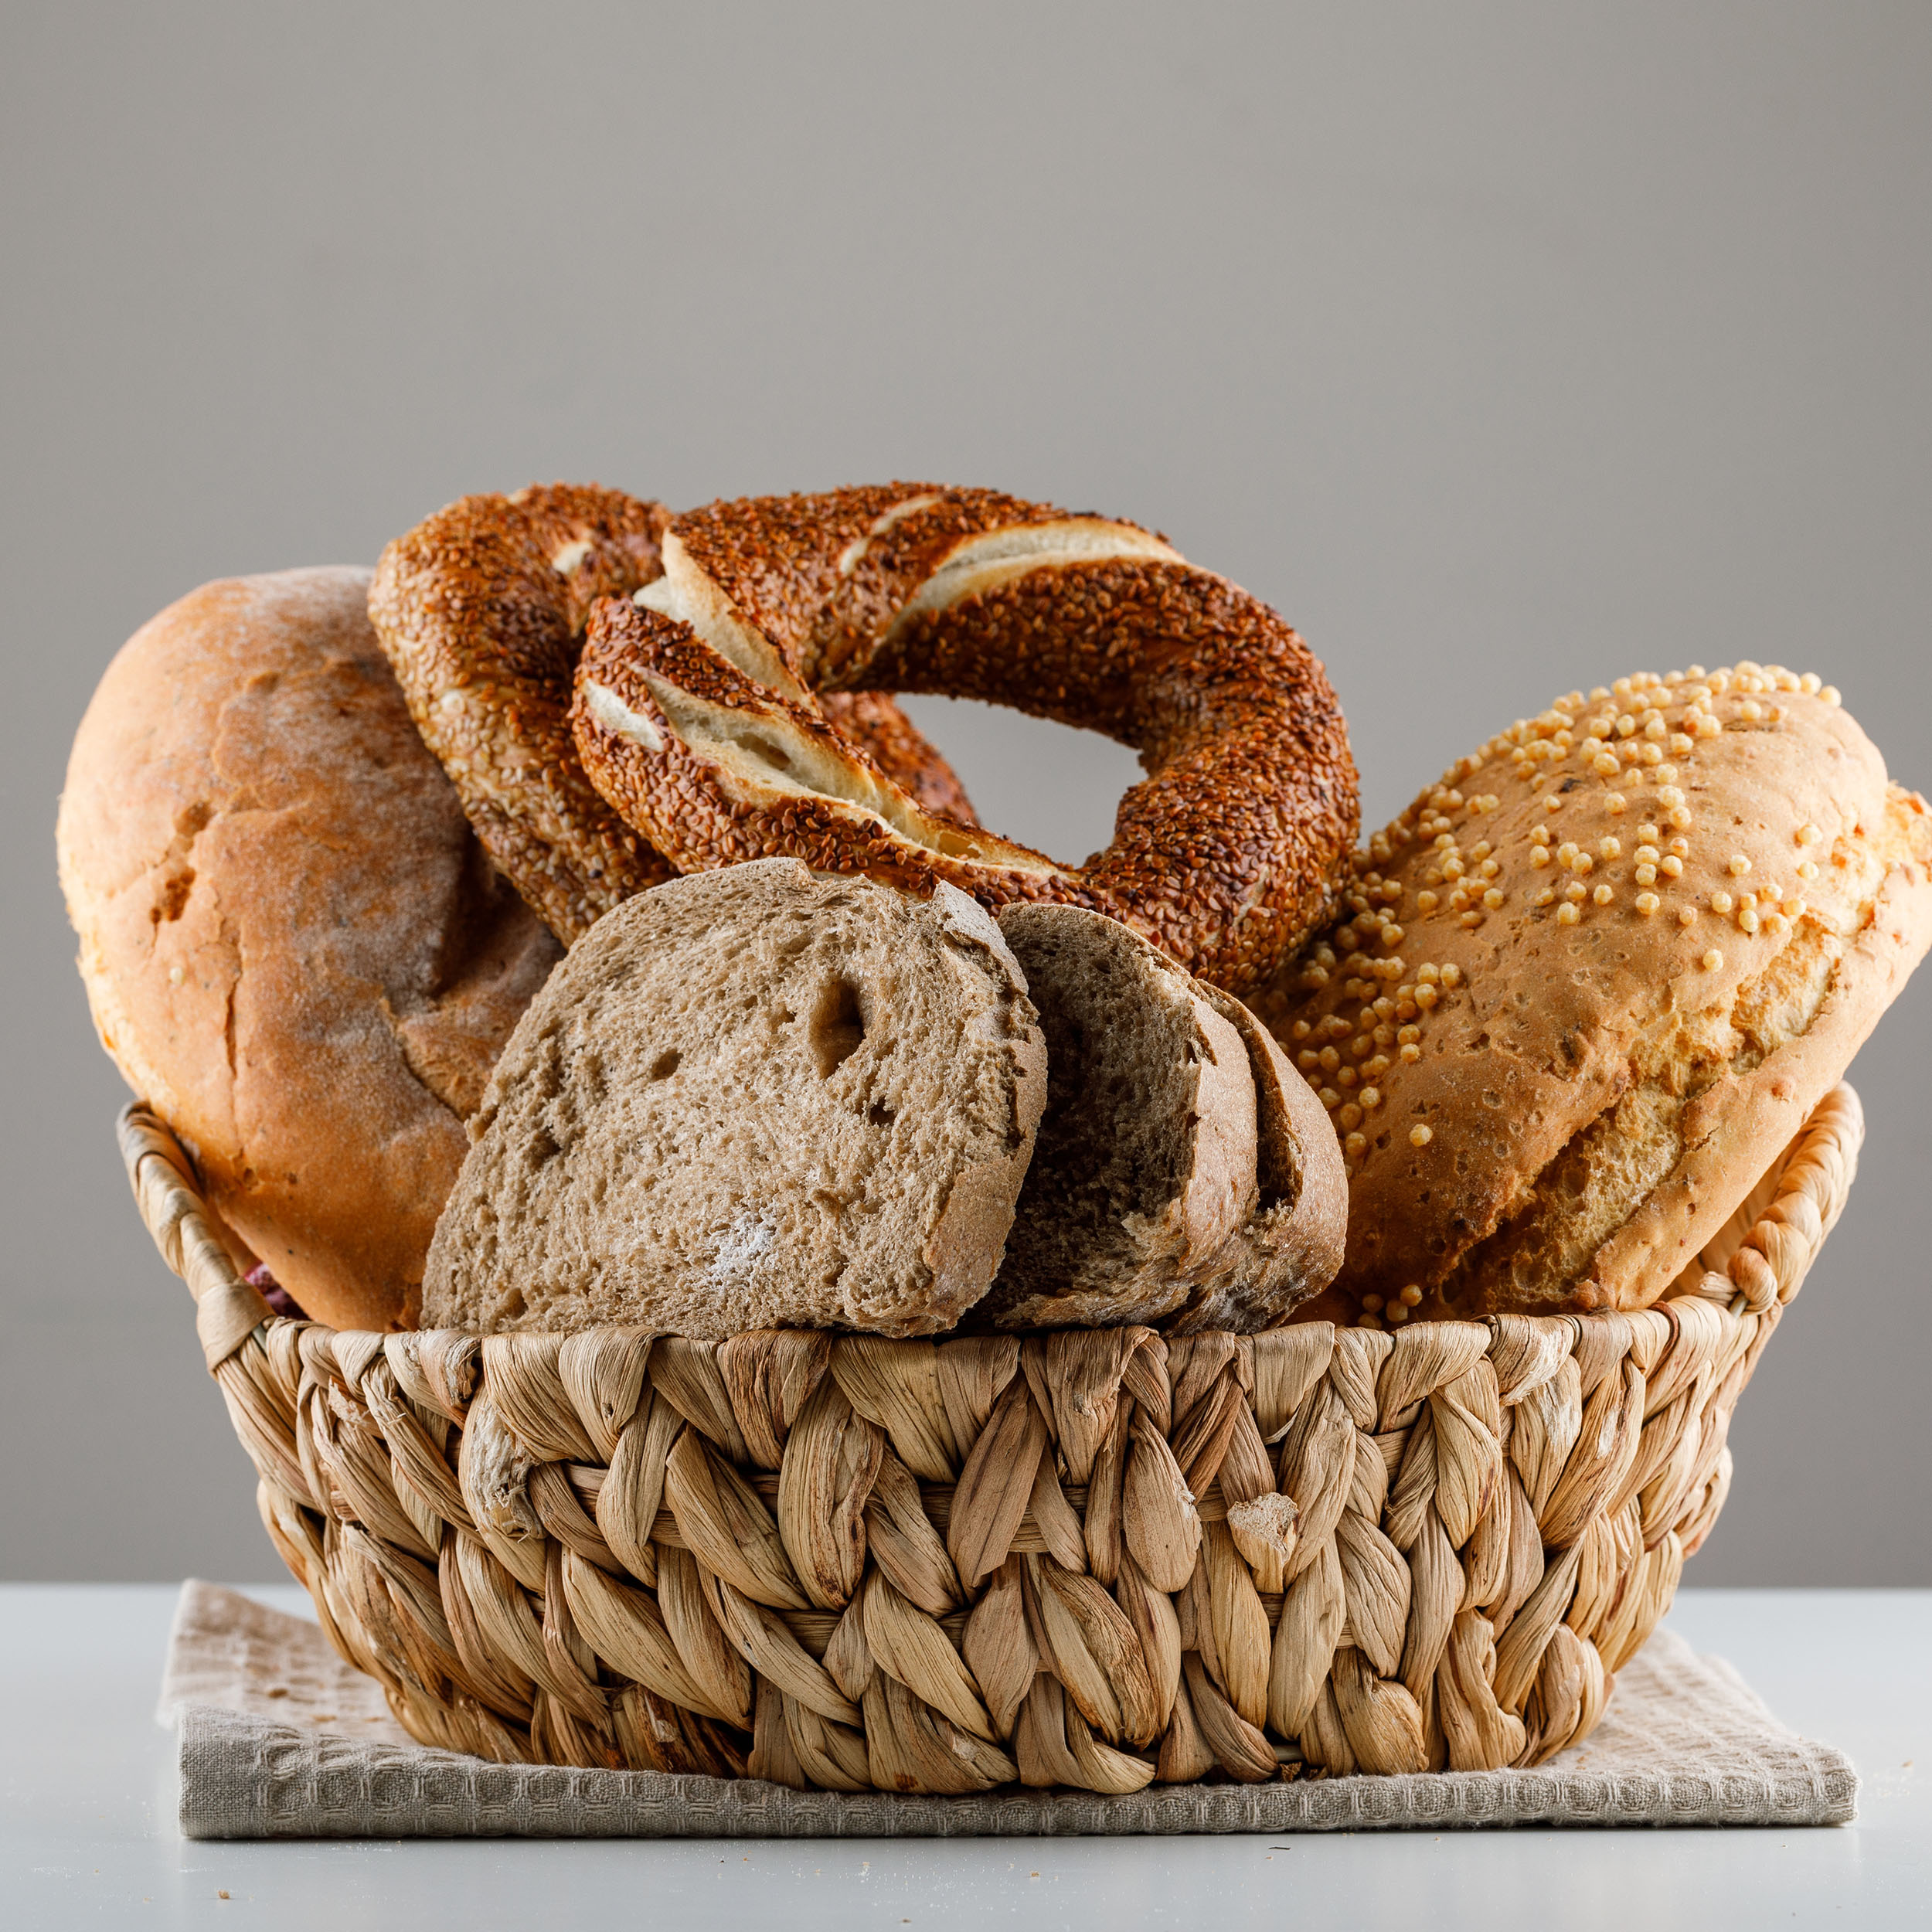 Sliced bread with turkish bagel side view on a white and gray background